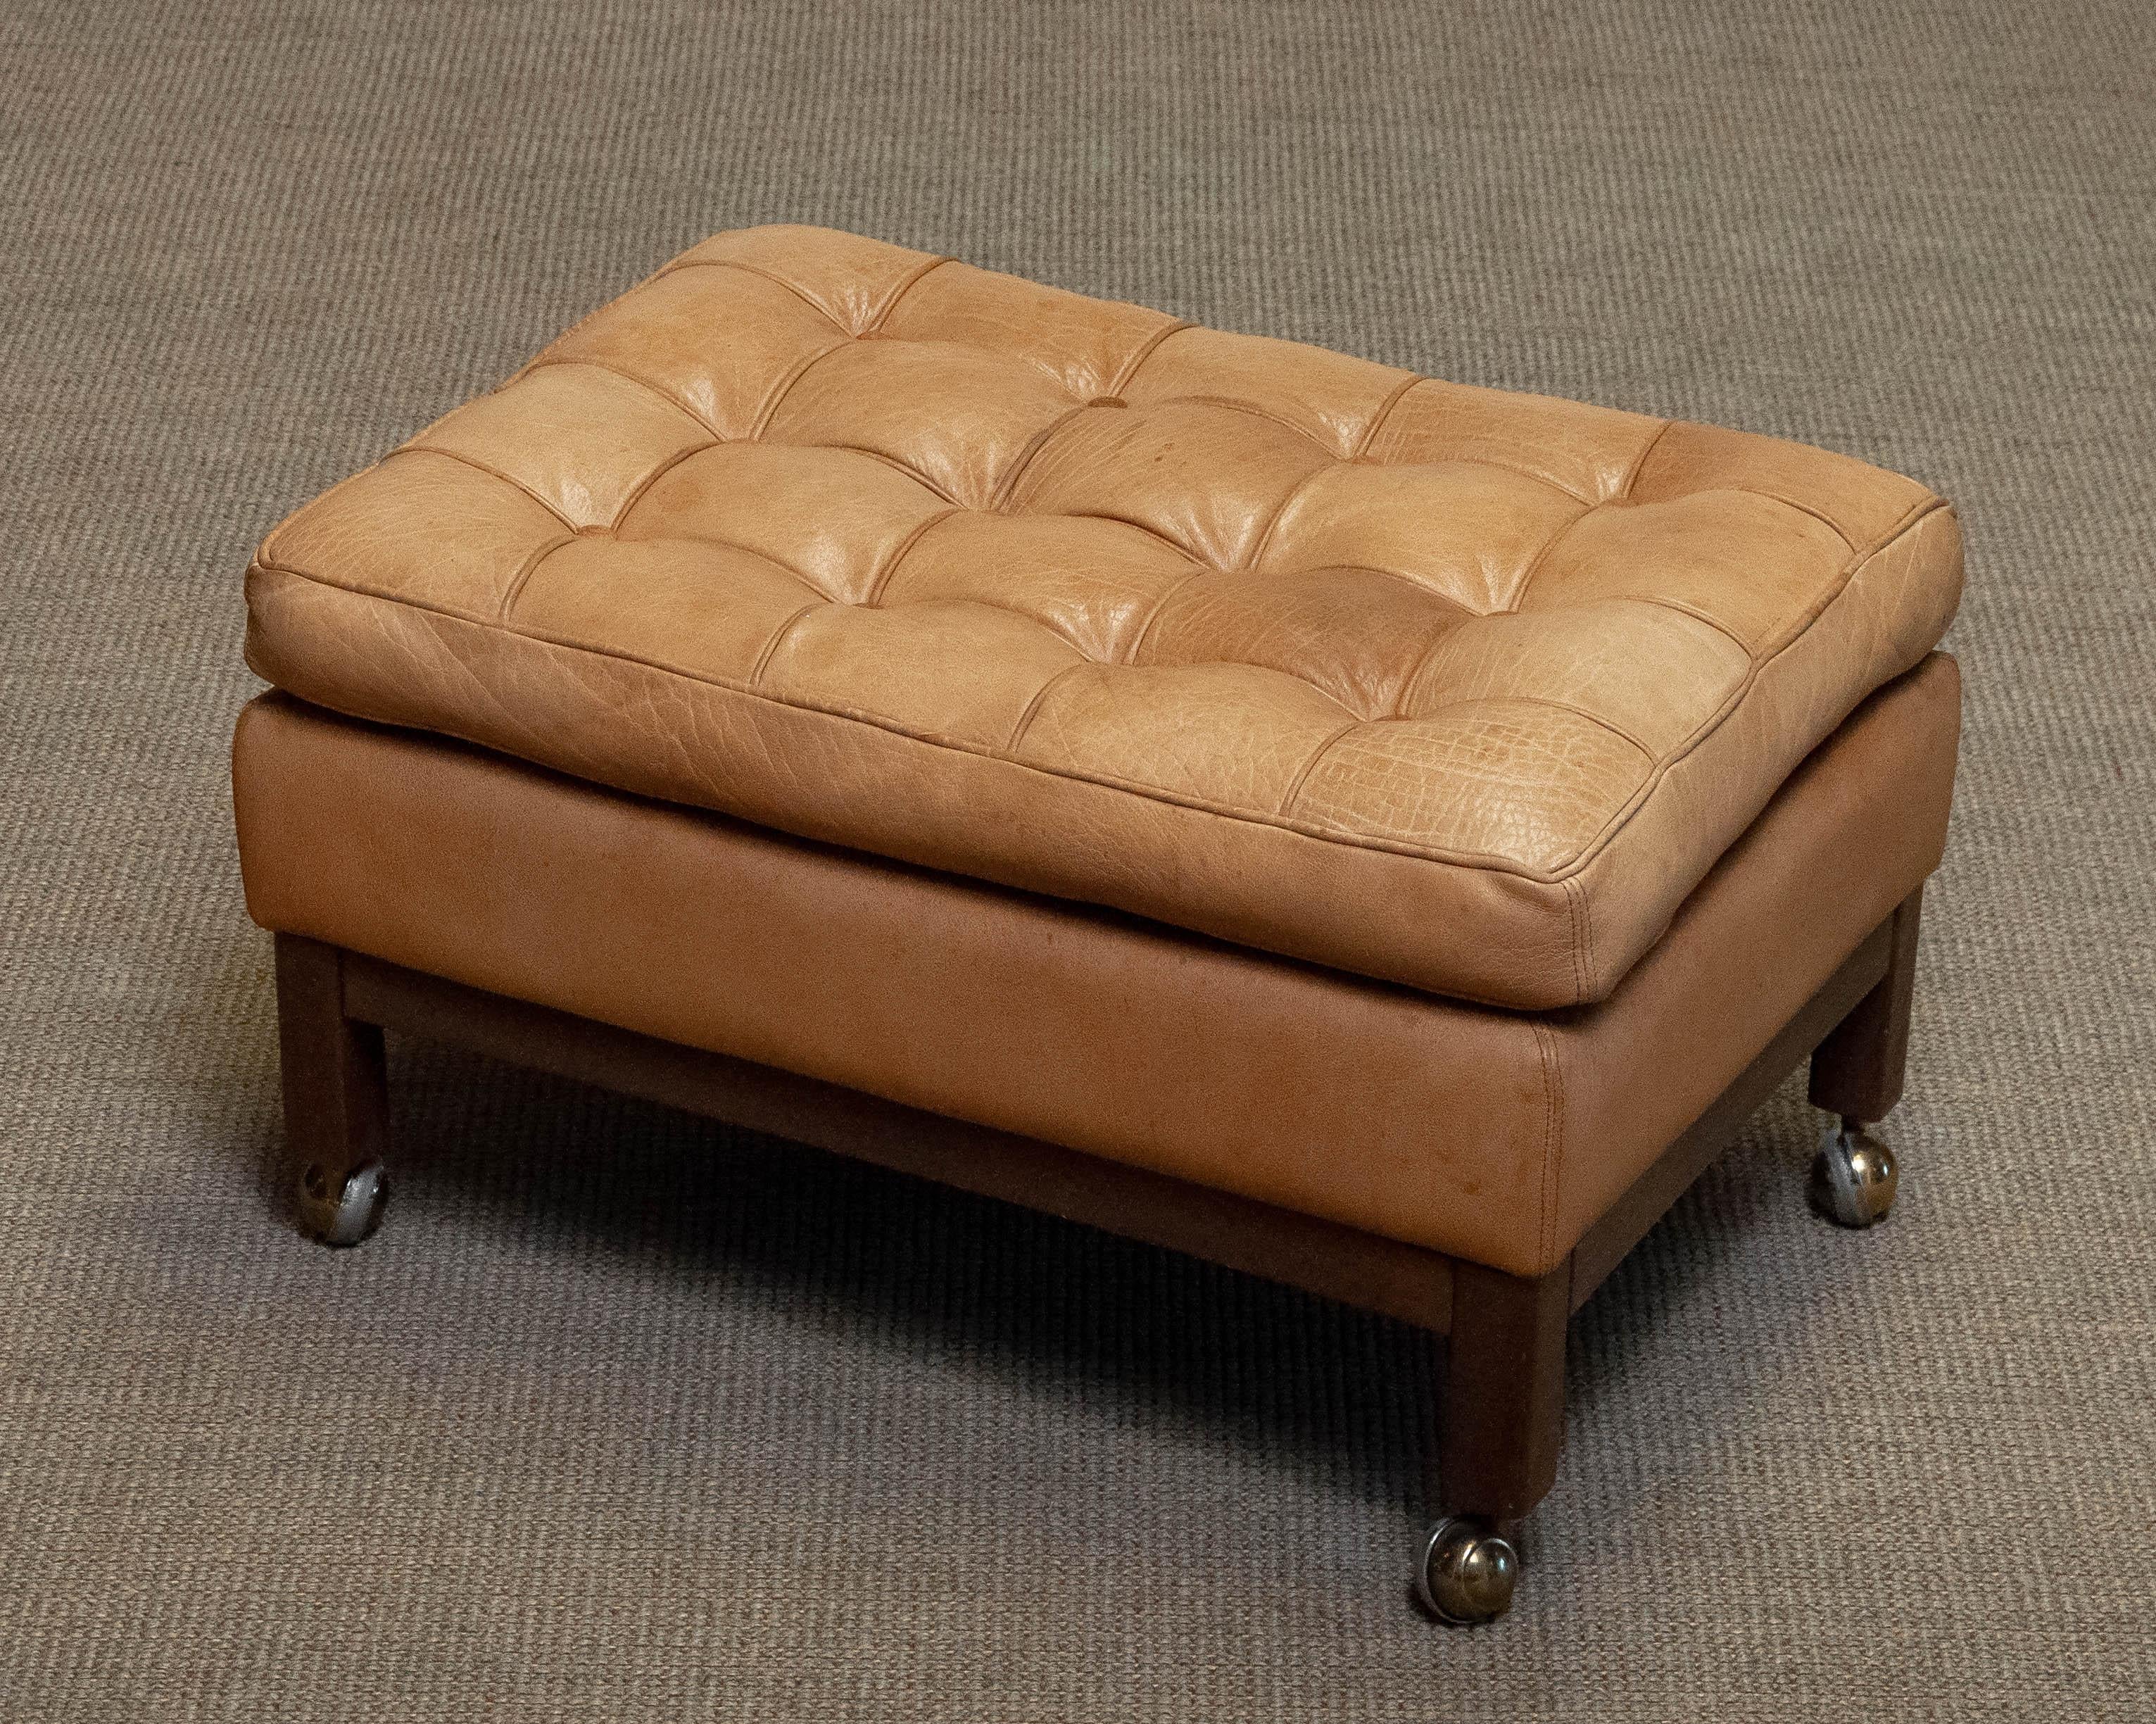 1970s Camel / Brown Colored Leather Ottoman Model 'Merkur' by Arne Norell In Good Condition For Sale In Silvolde, Gelderland